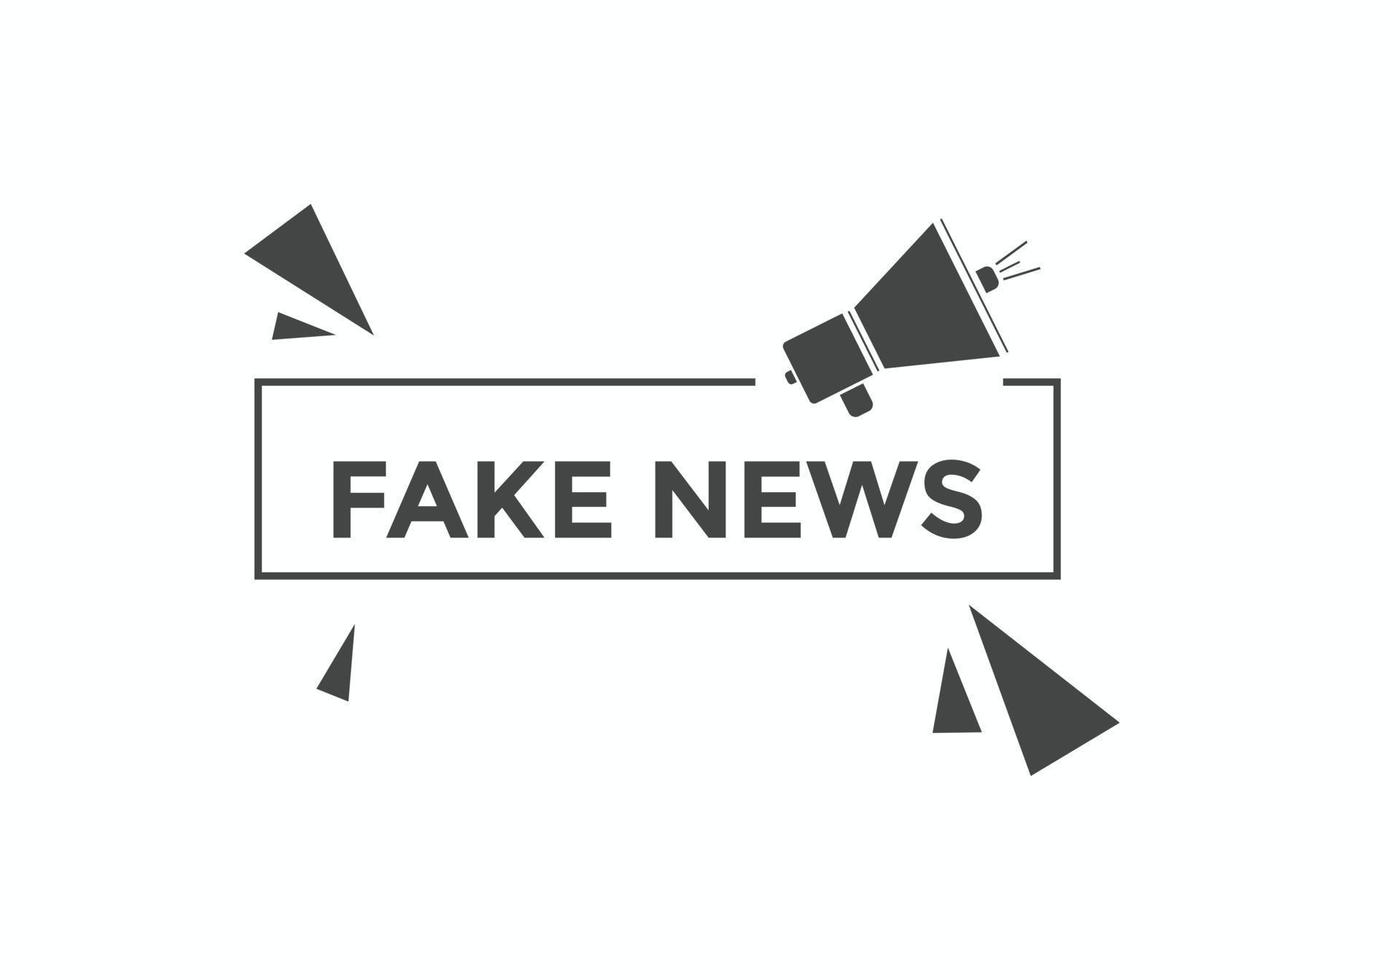 Fake news button. Fake news Colorful label sign template. speech bubble vector